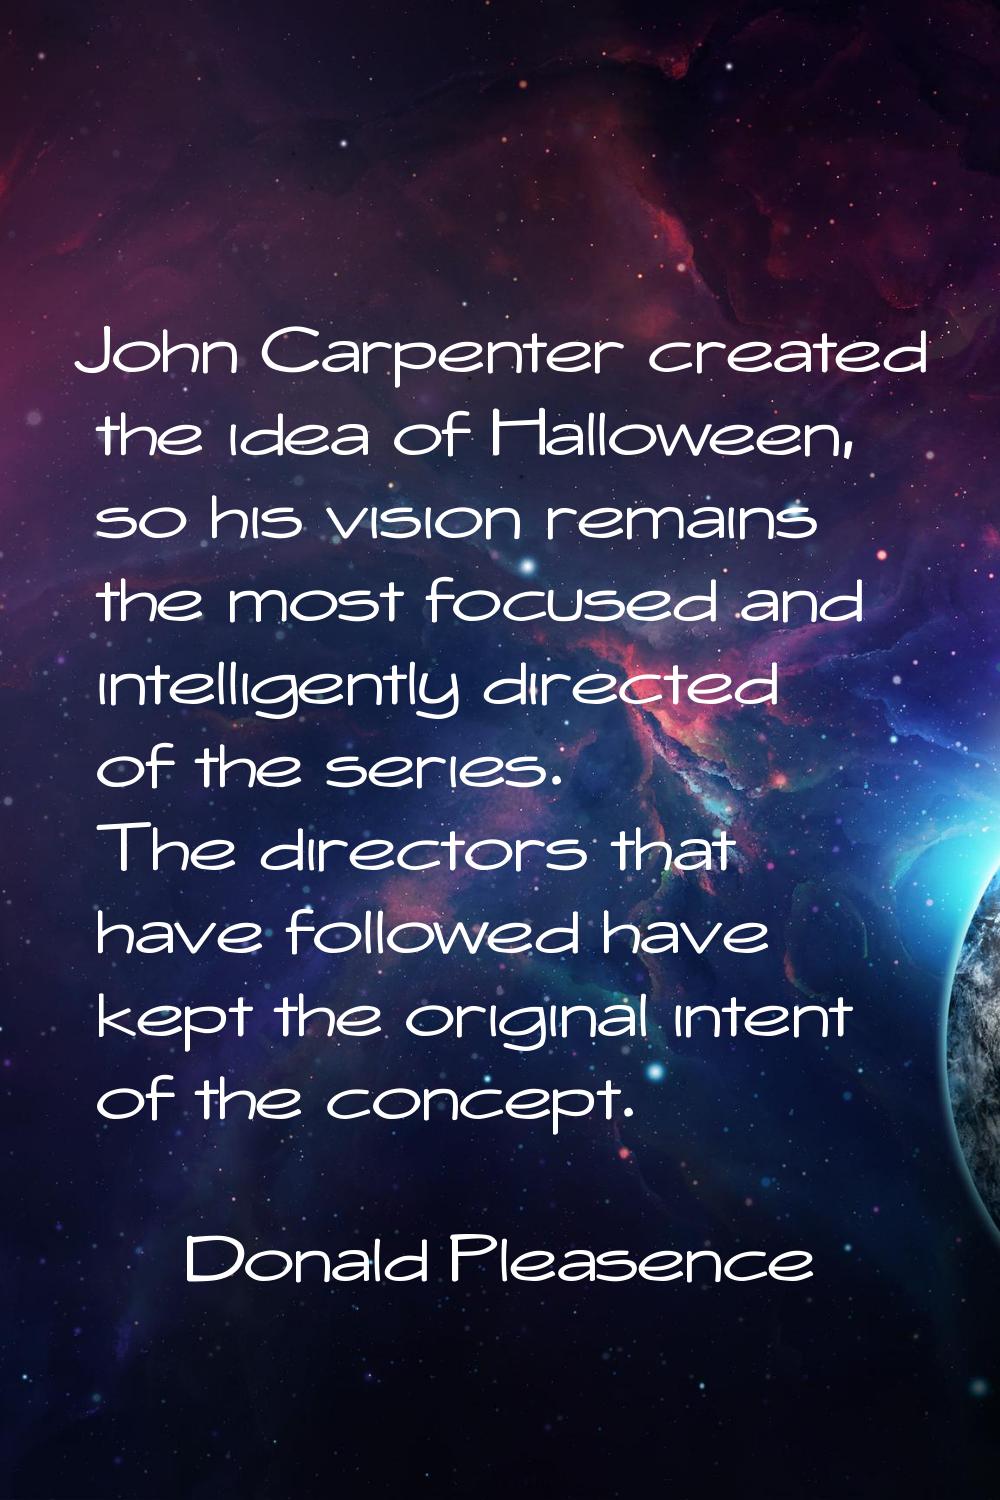 John Carpenter created the idea of Halloween, so his vision remains the most focused and intelligen